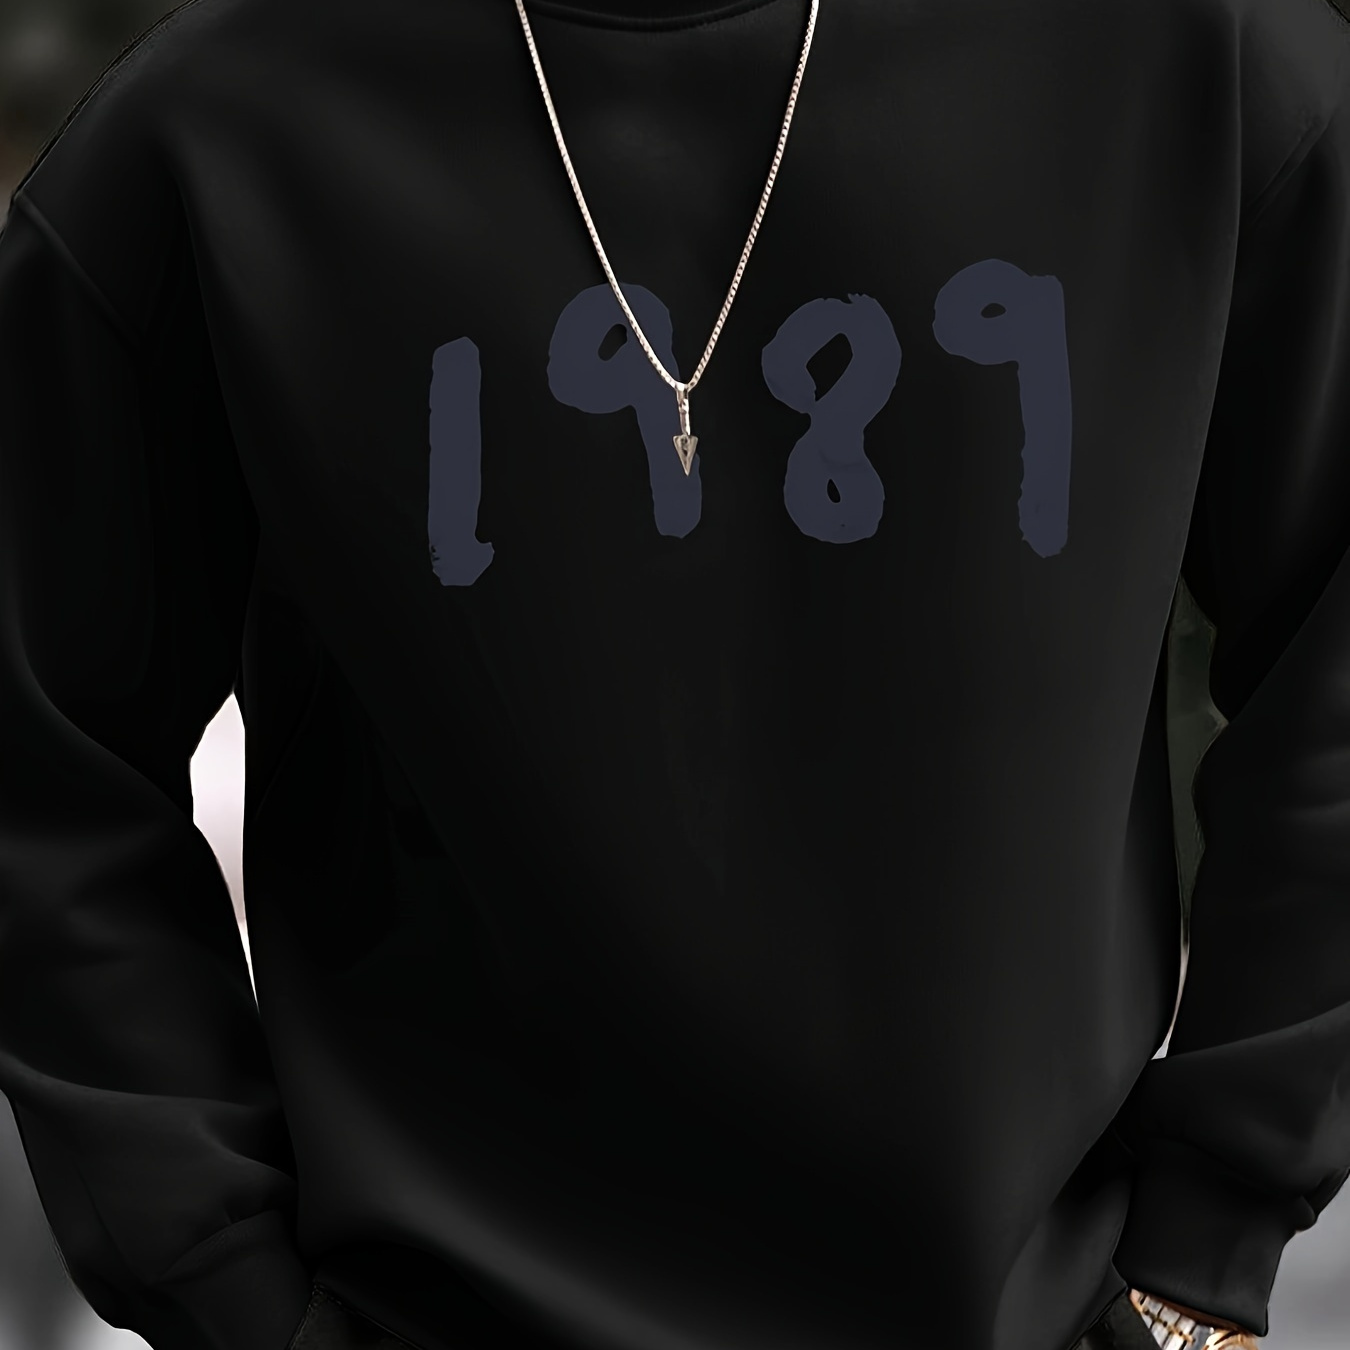 

1989 Print Fashionable Men's Casual Long Sleeve Crew Neck Pullover Sweatshirt, Suitable For Outdoor Sports, For Autumn Spring, Can Be Paired With Necklace, As Gifts